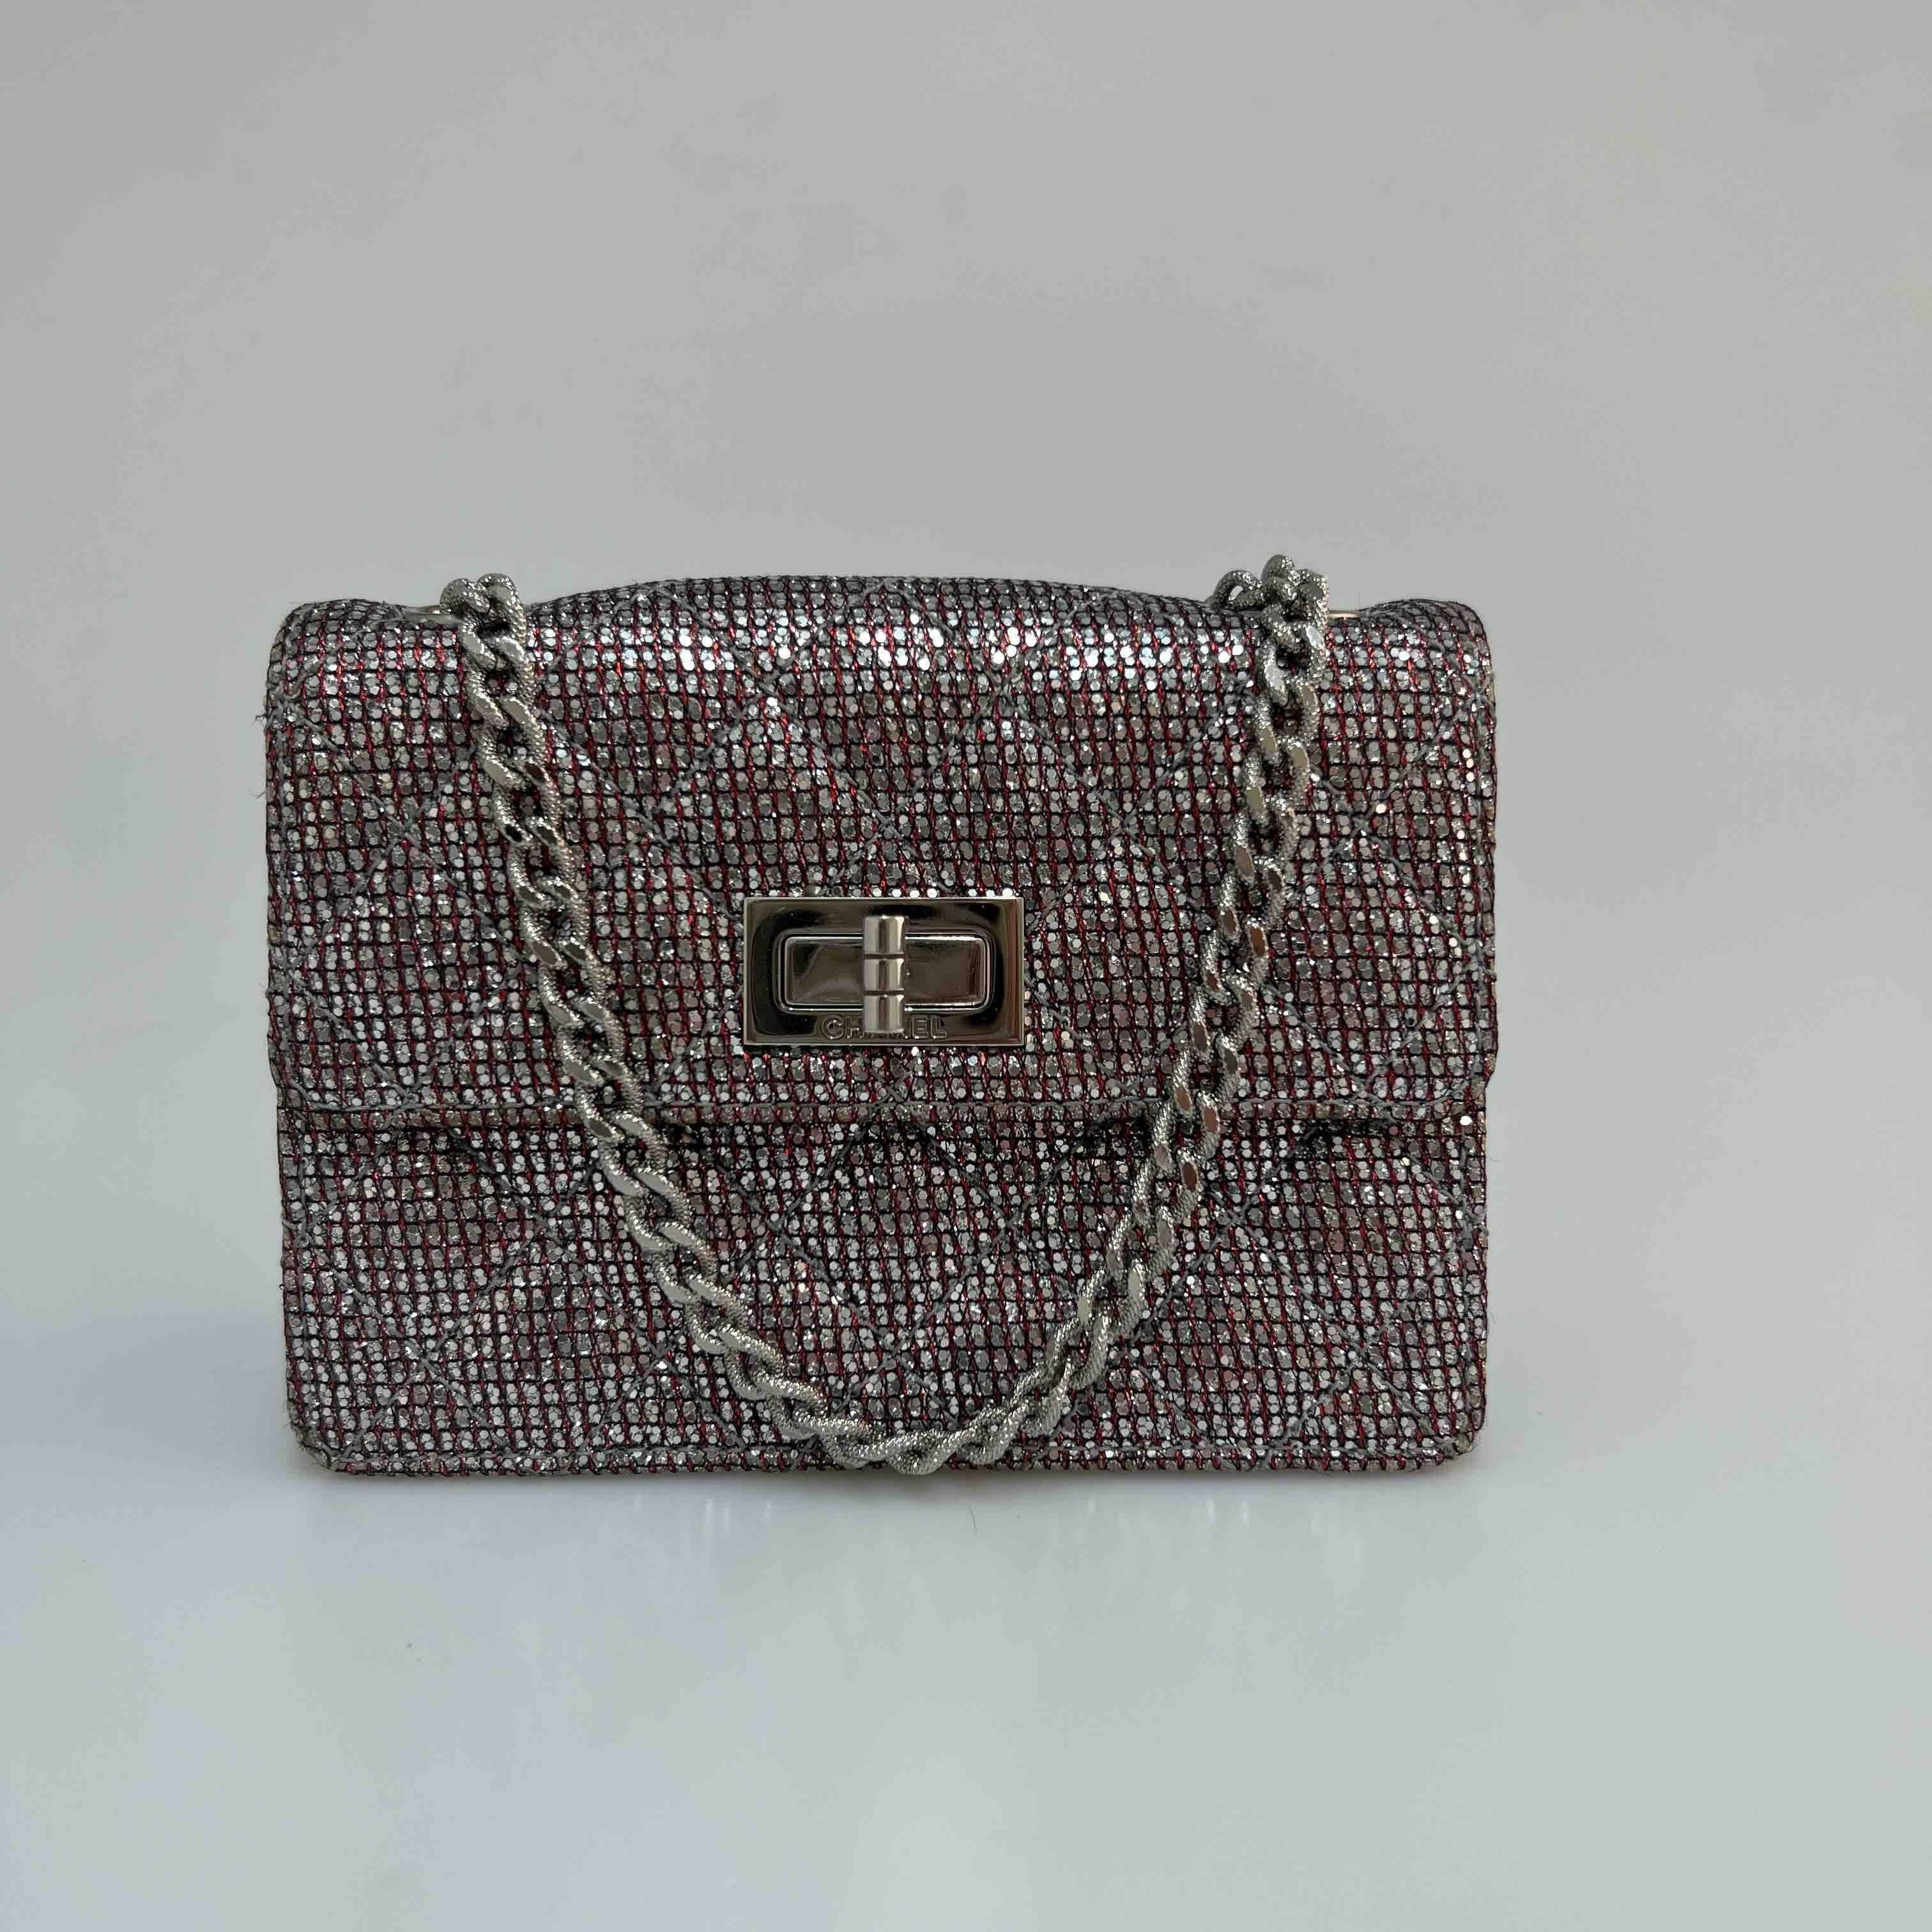 CHANEL Mini 255 Bag in Pink and Silver fabric set with rhinestones. Beautiful evening bag. The hardware is in silver metal.
In very good condition.
Made in France.
Material: fabric
Dimensions: 14 x 10 x 6cm
Shoulder strap: 130 cm
Hologram: